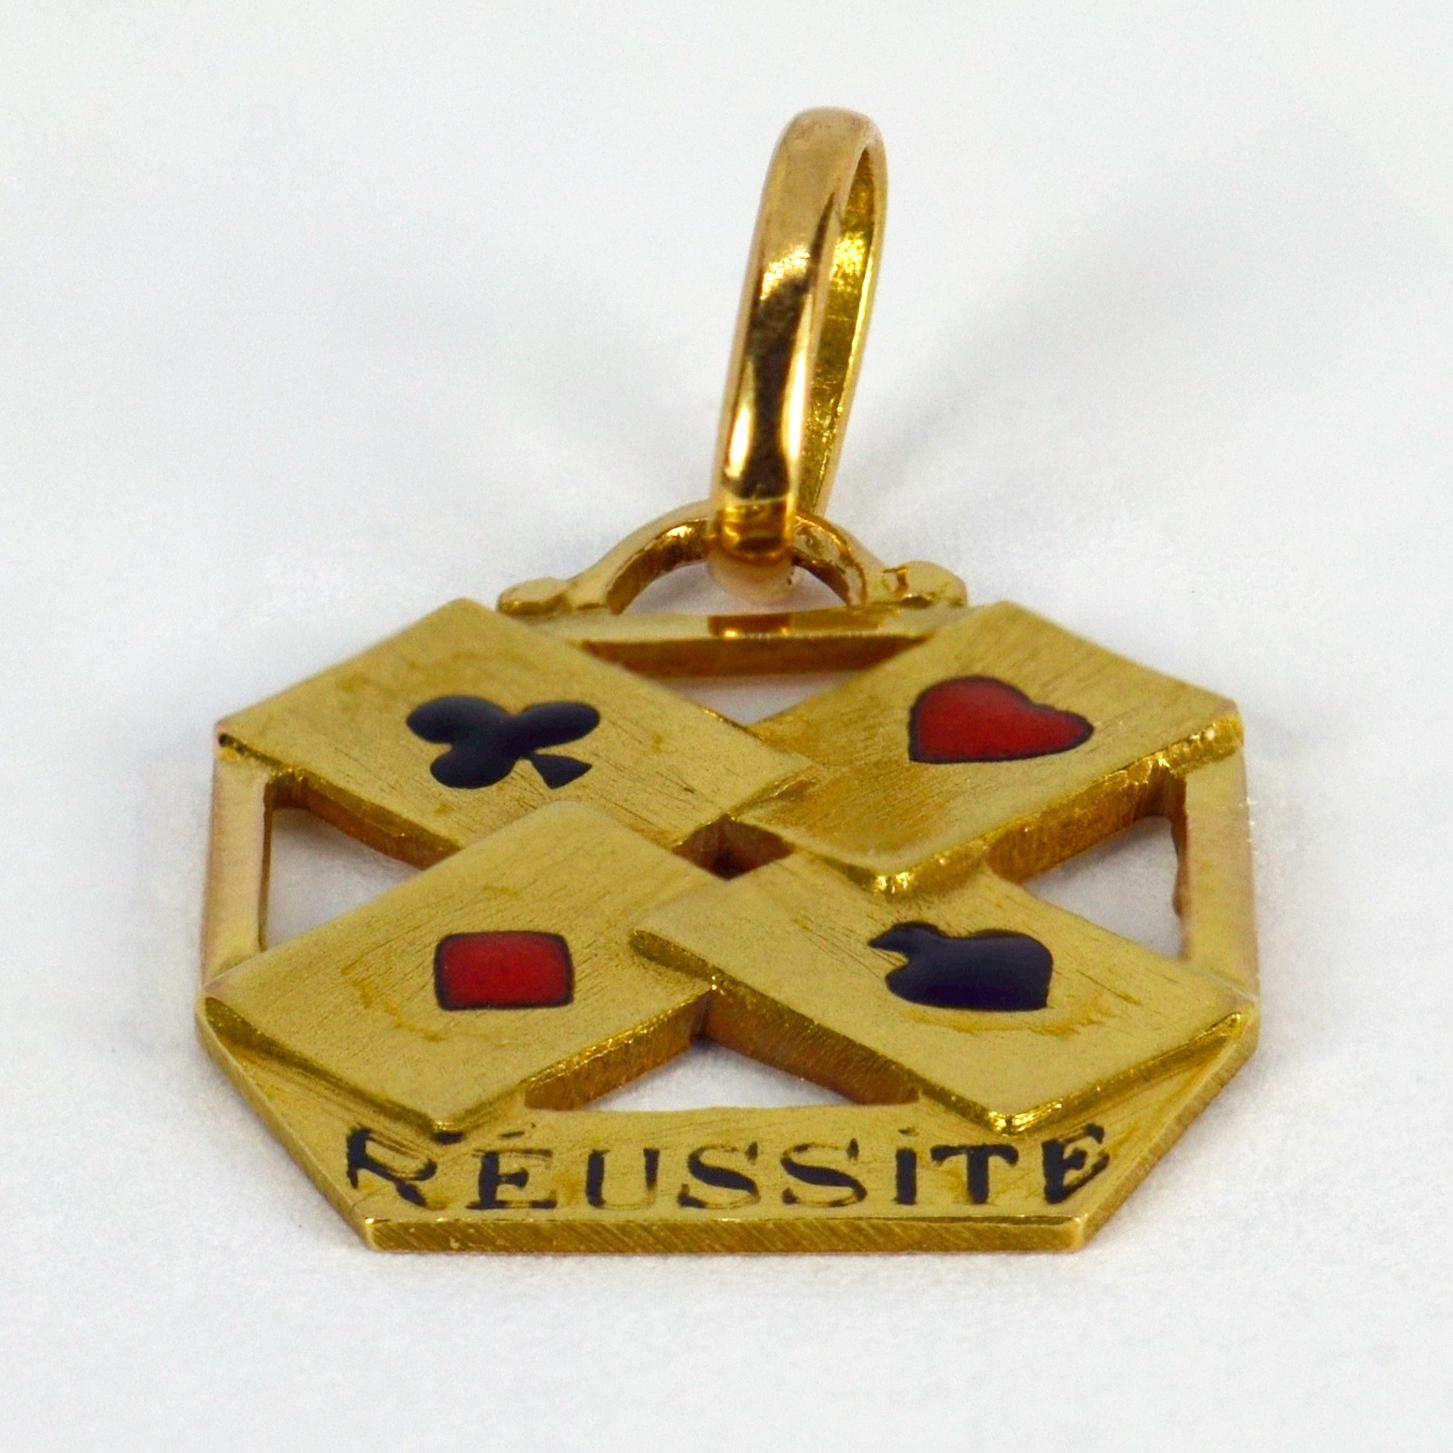 A French 18 karat (18K) yellow gold gambling cards charm pendant designed as a set of four aces, with the word ‘Reussite’ (Success) on a banner below. Stamped with the eagle’s head for 18 karat gold and French manufacture.

Dimensions: 1.8 x 1.4 x